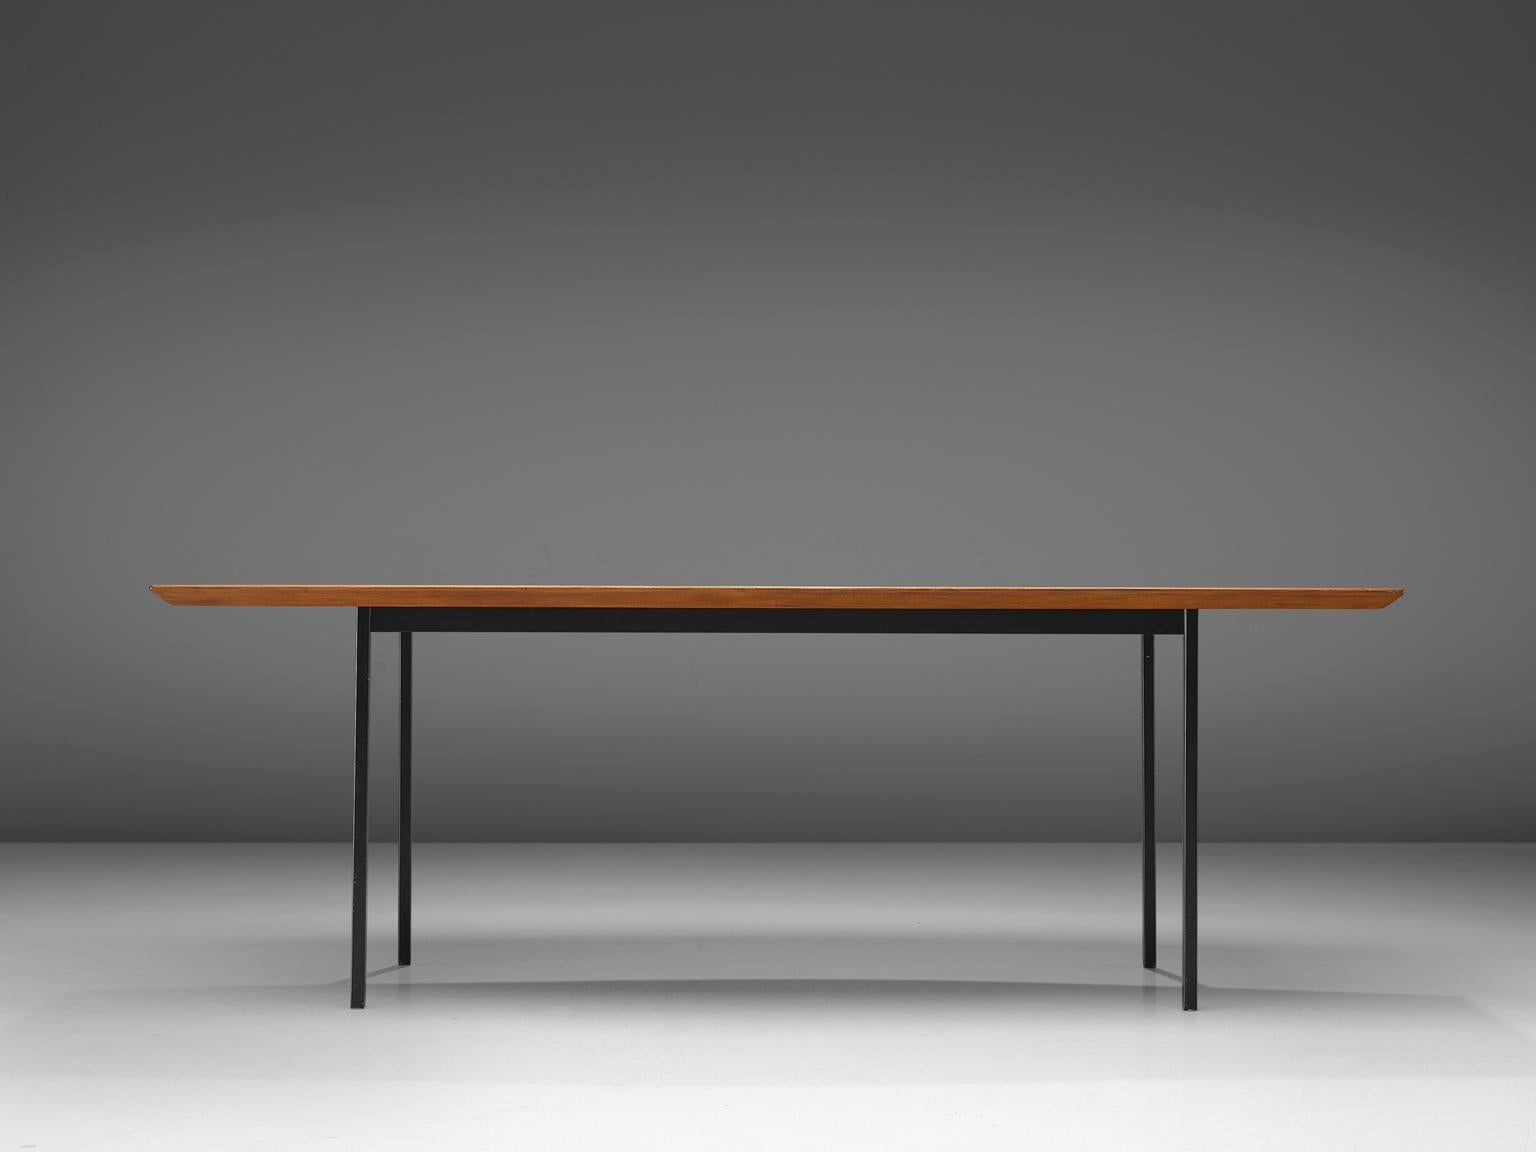 Knoll International, walnut, metal, table model 580, United States, 1958-1976.

Large dining table with boat shaped top in walnut. The table can seat 8 people. The table has four circular legs. The tabletop features a bevelled, edge, made of a